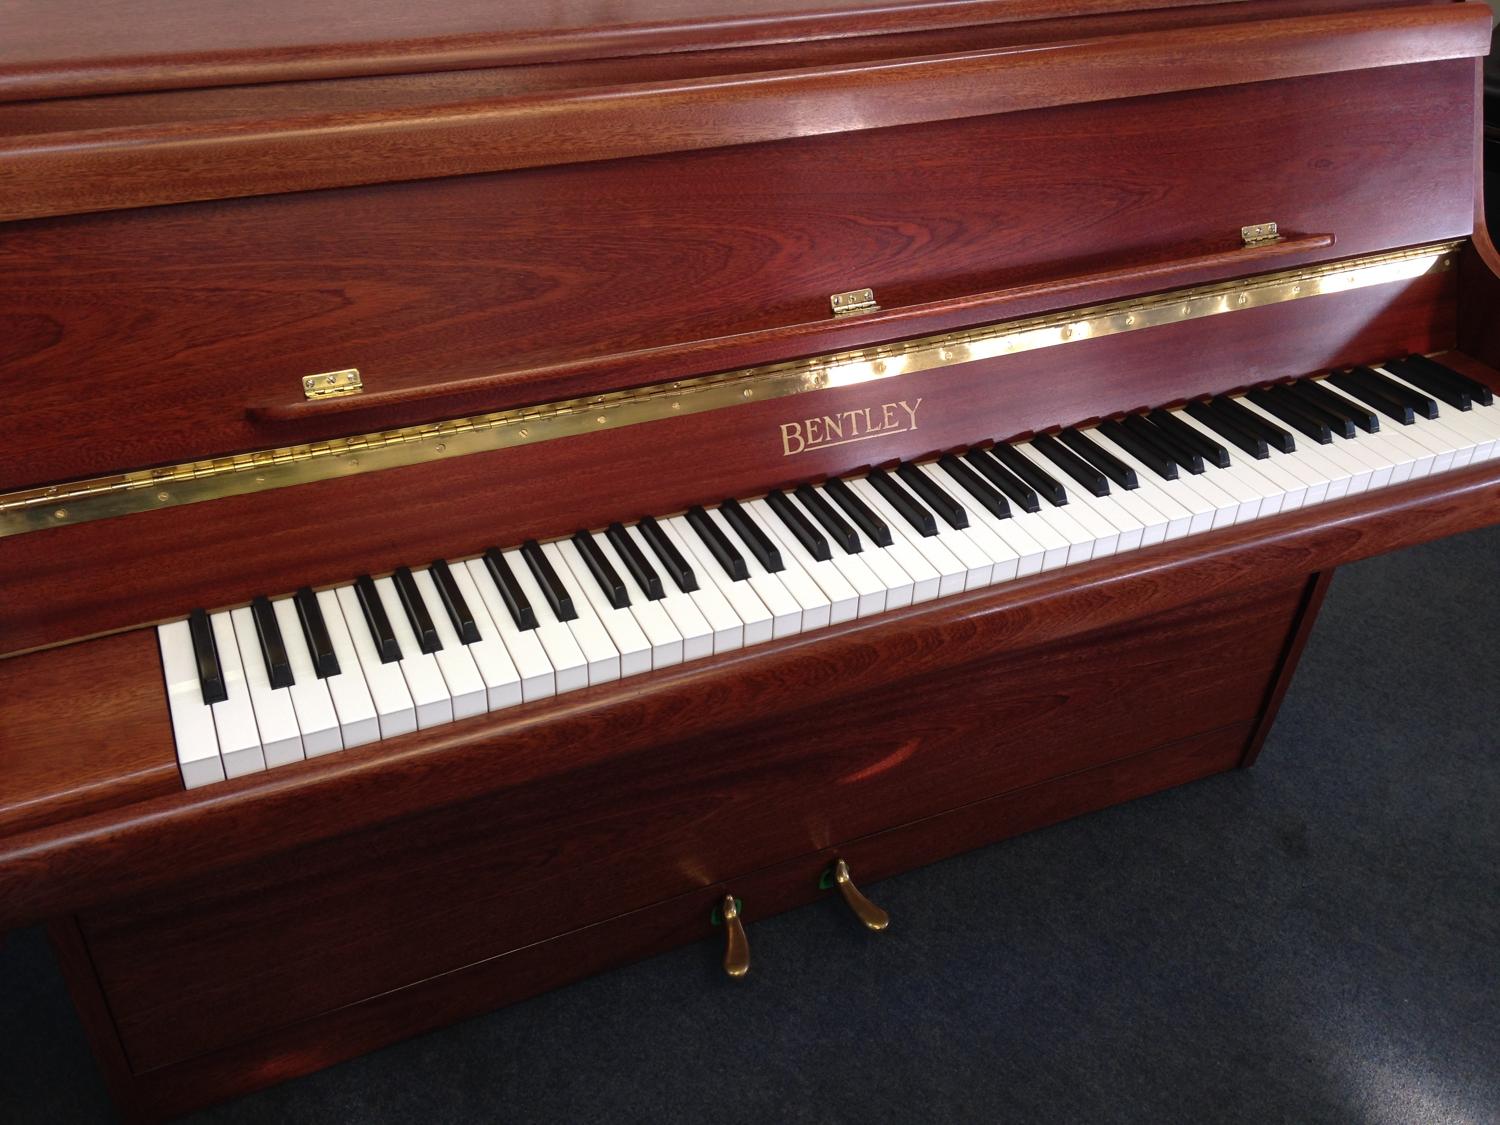 BENTLEY upright piano for sale